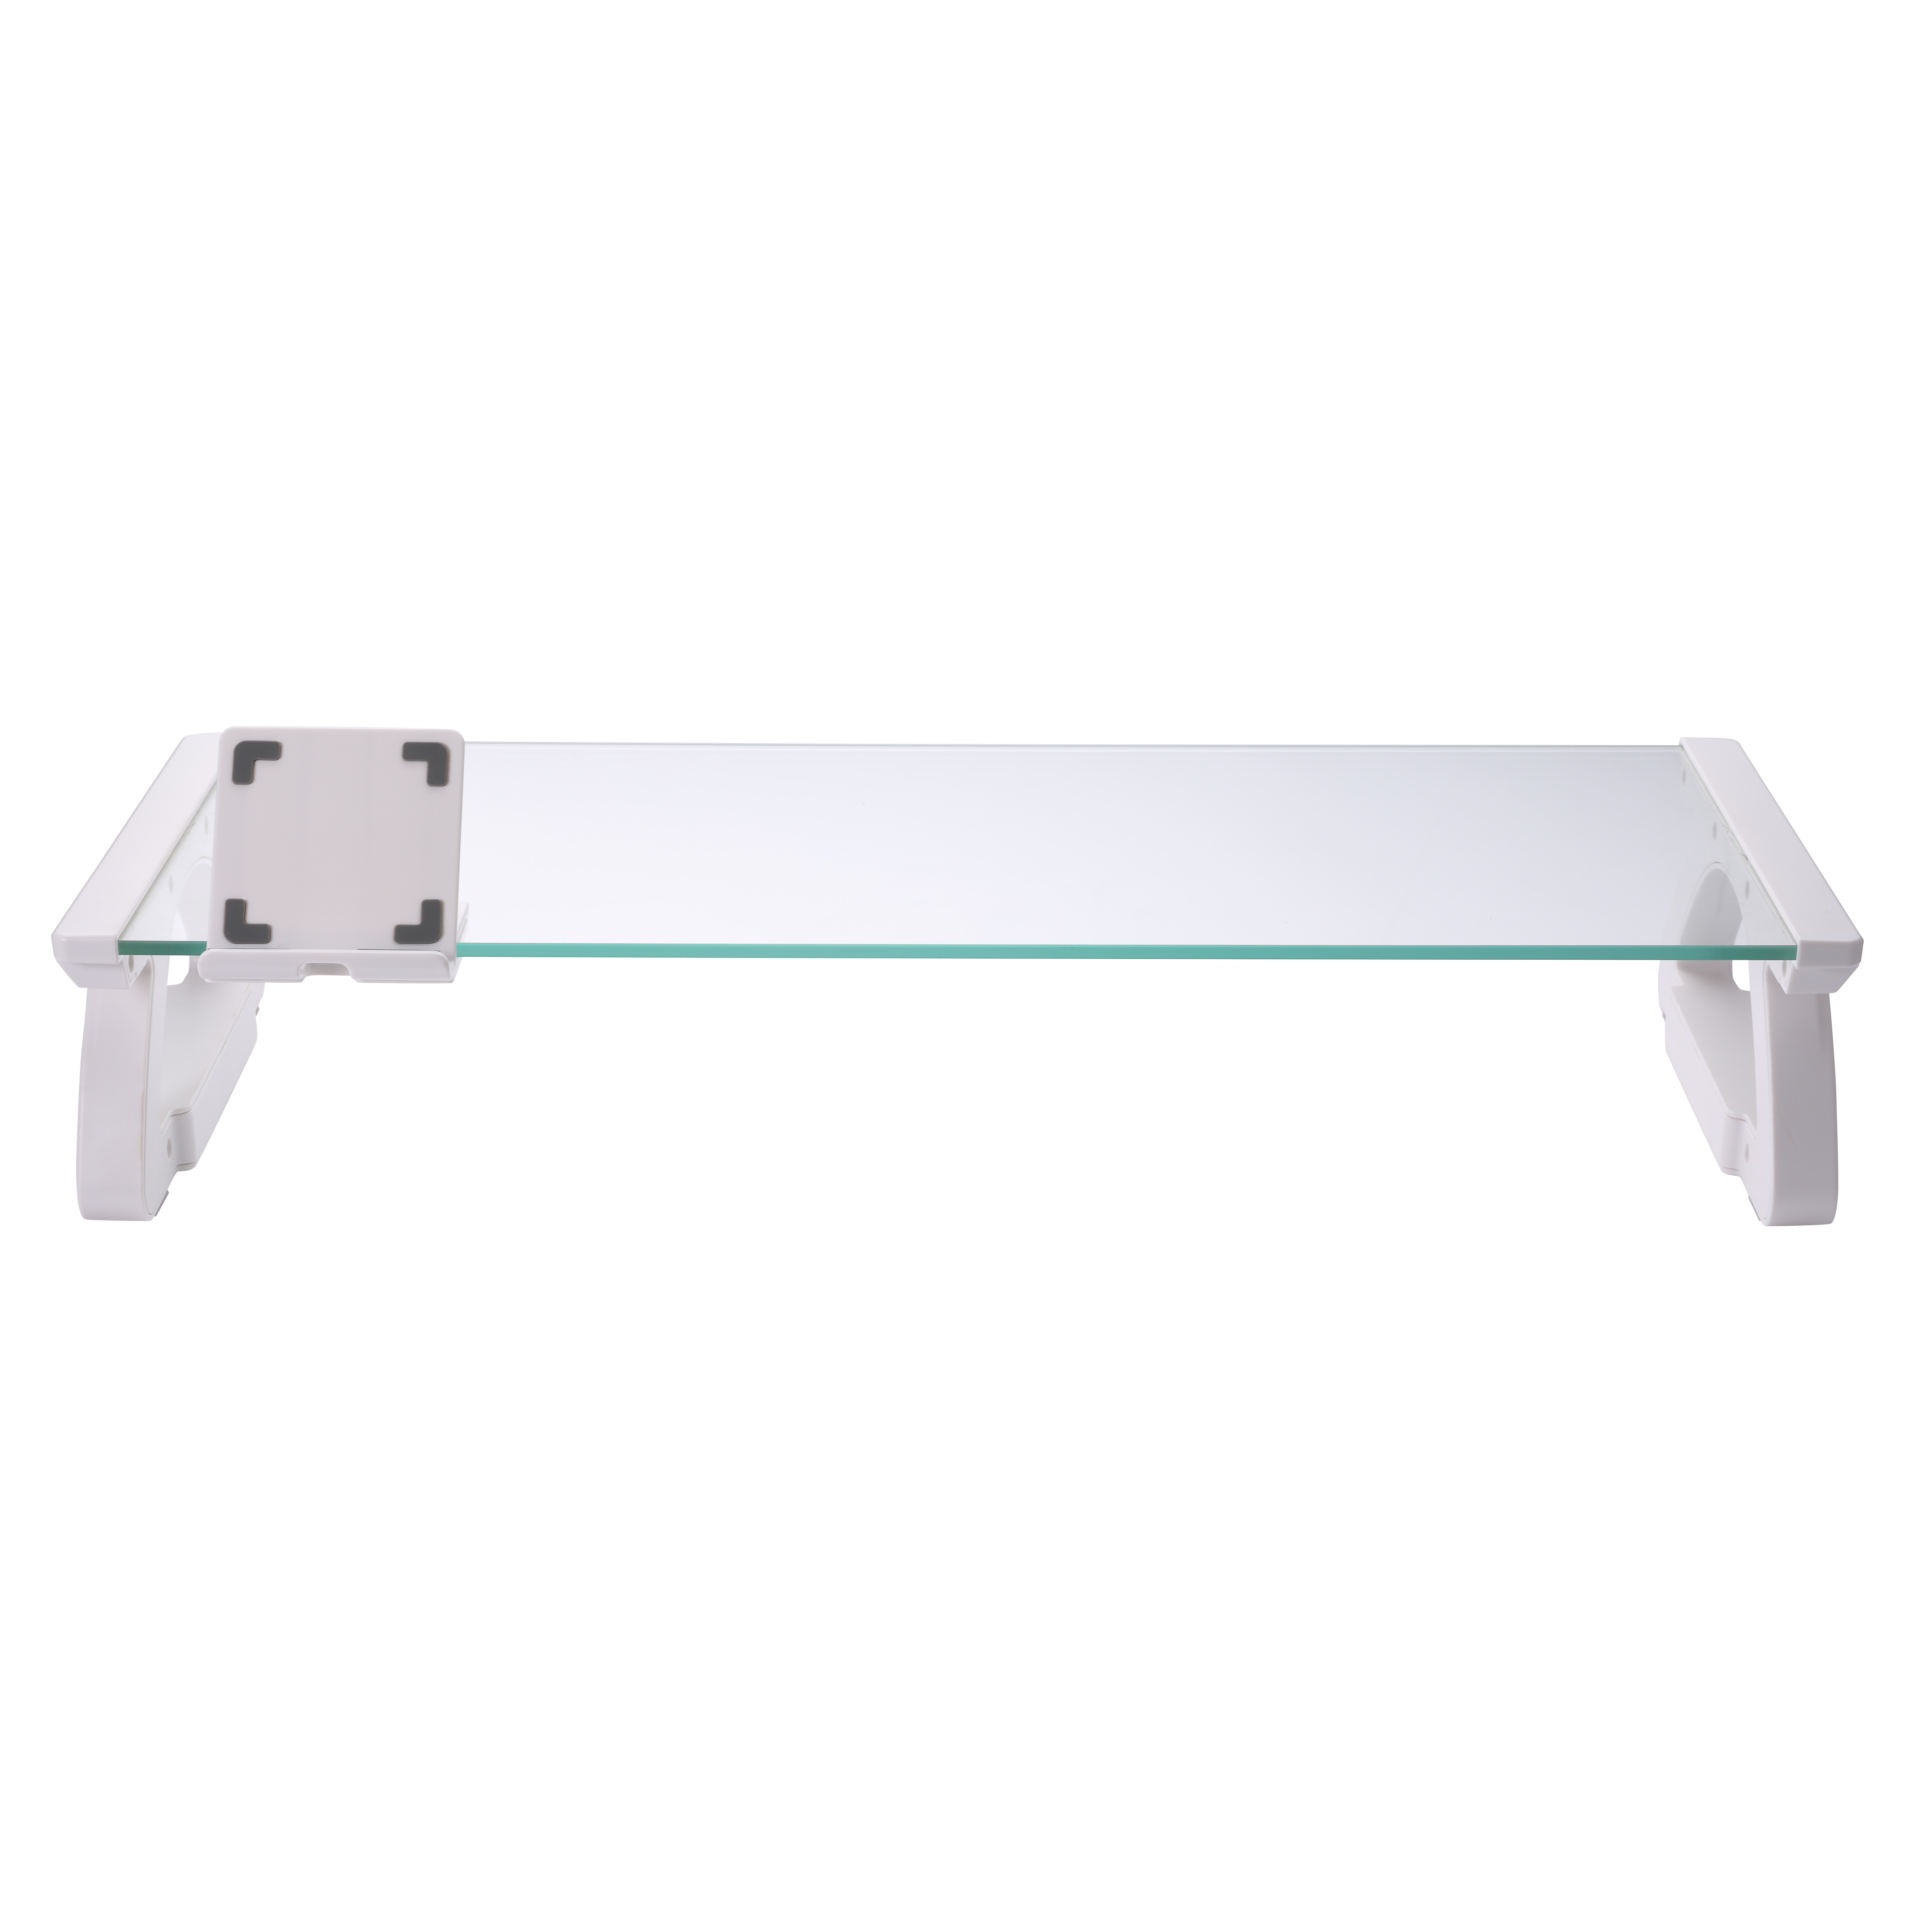 L32 monitor stand